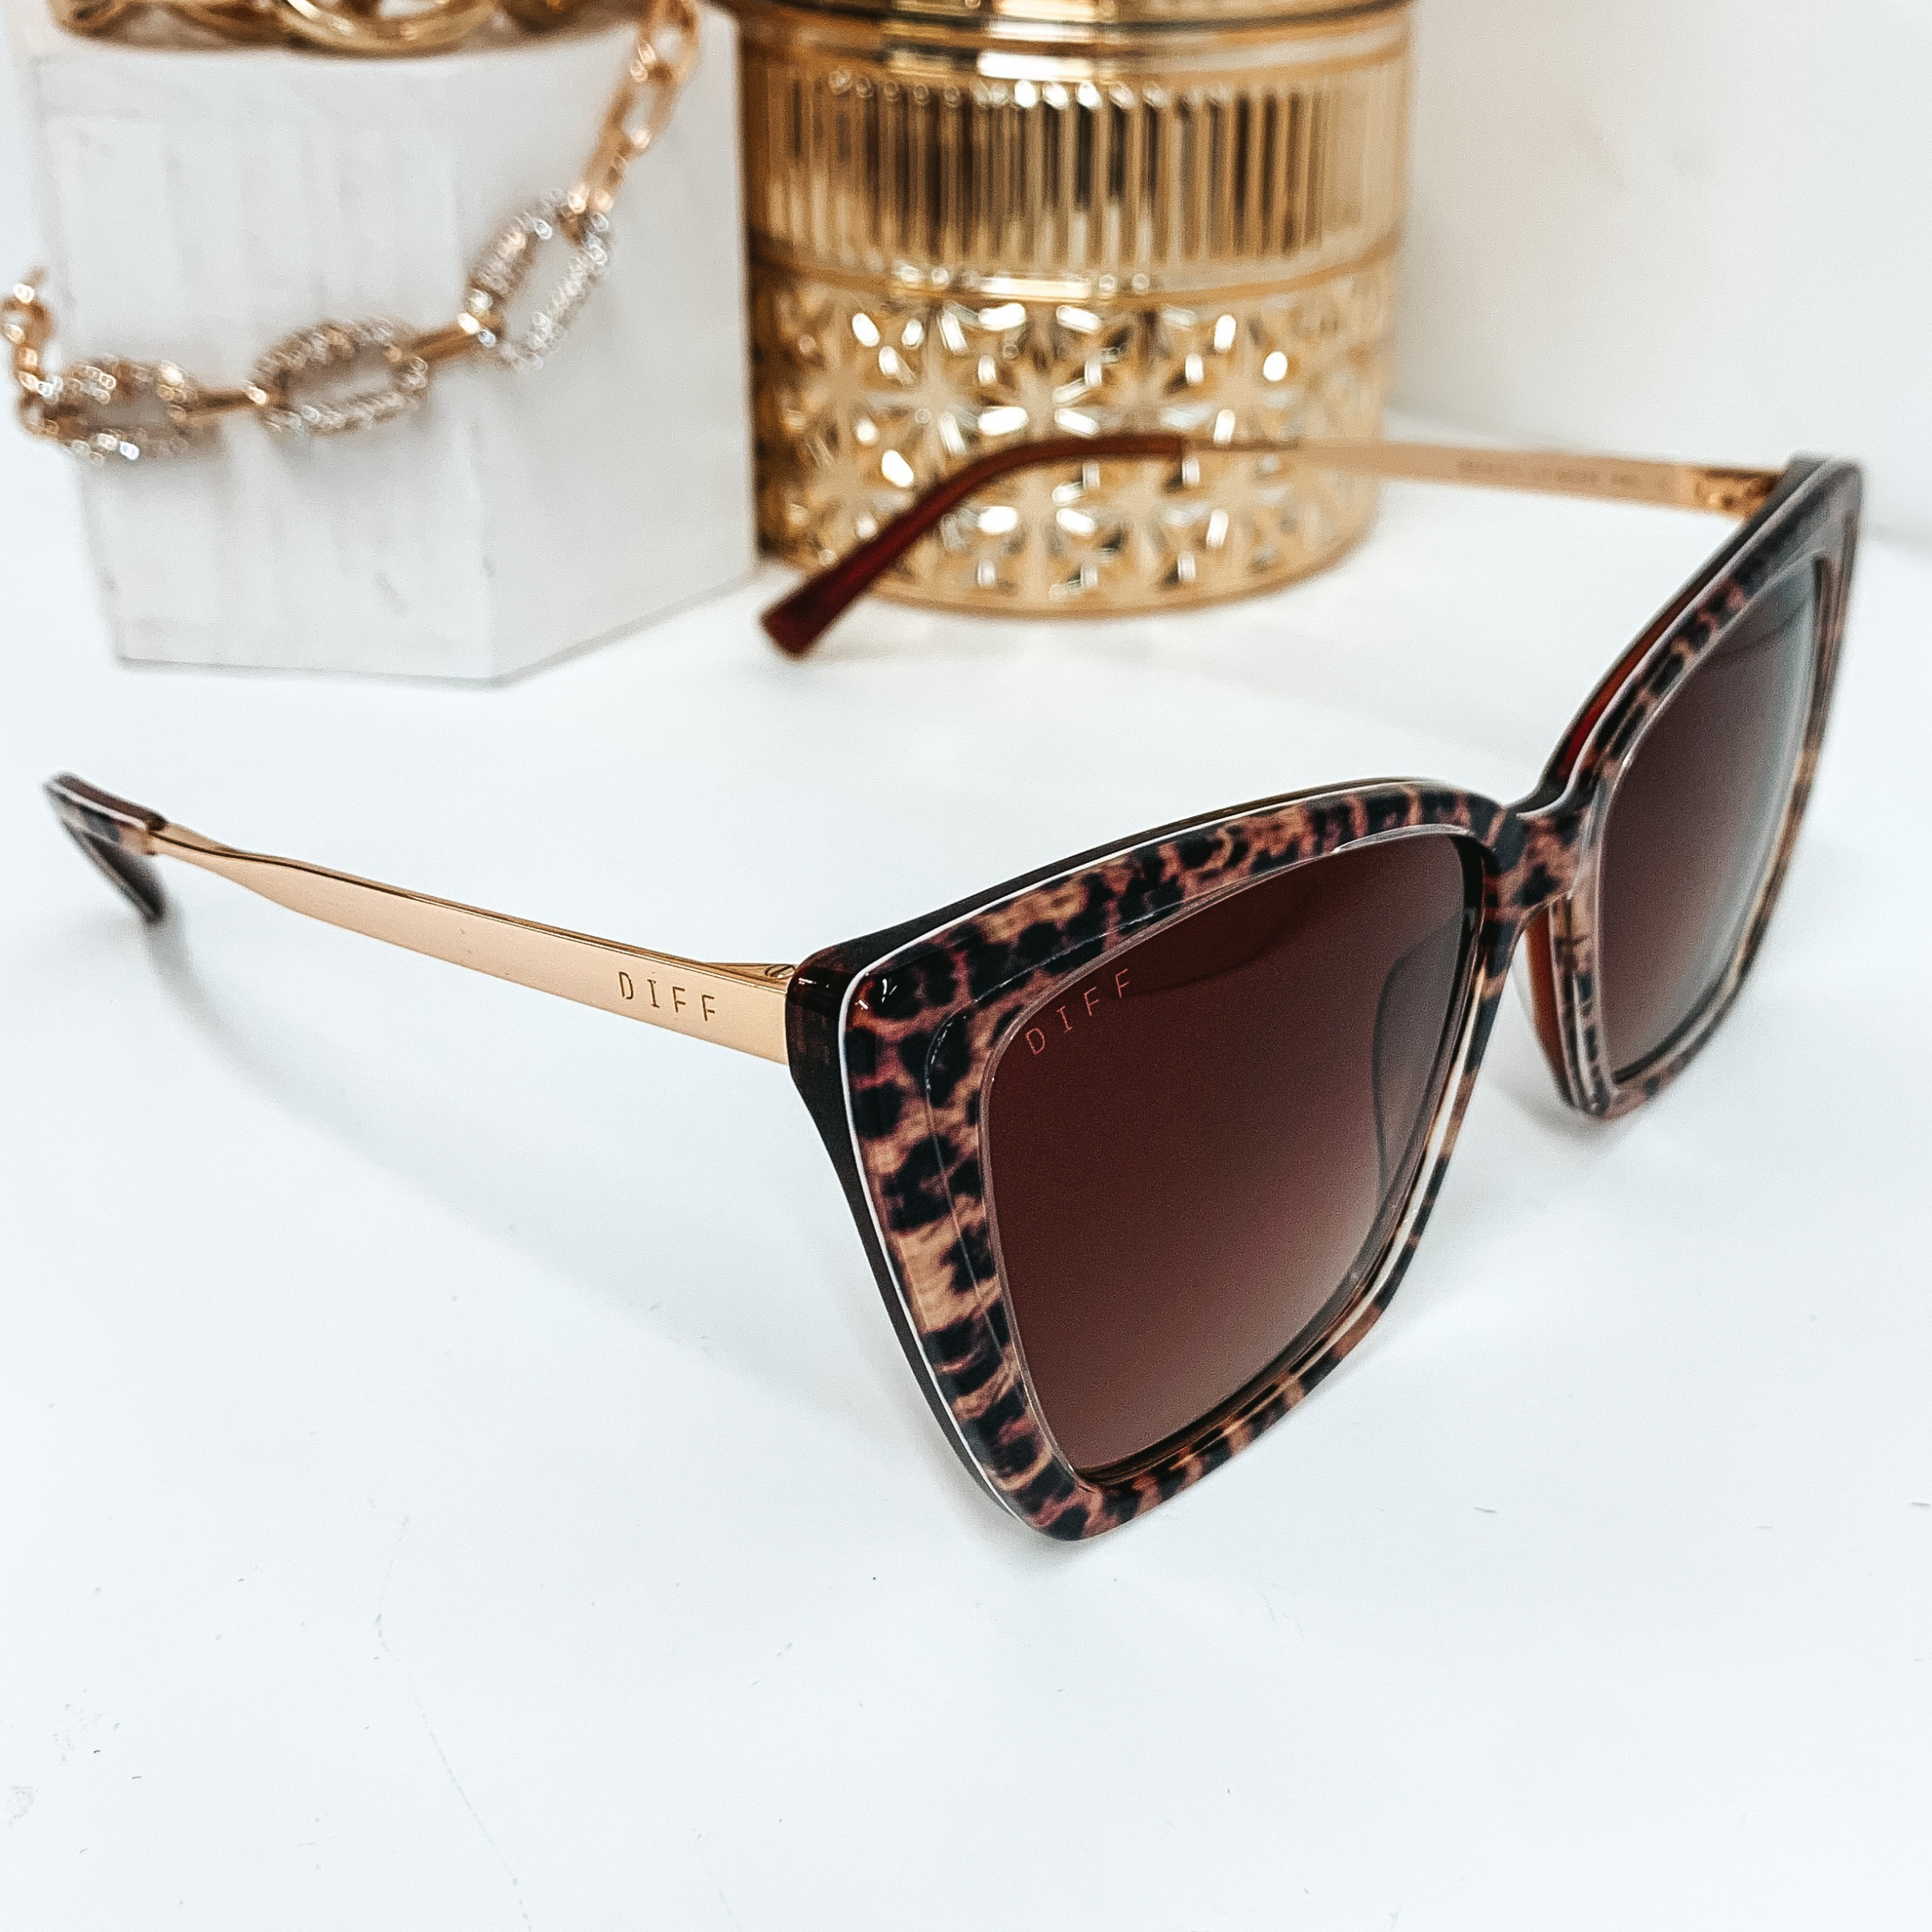 DIFF | Becky II Brown Gradient Lens Sunglasses in Leopard Tortoise Print - Giddy Up Glamour Boutique